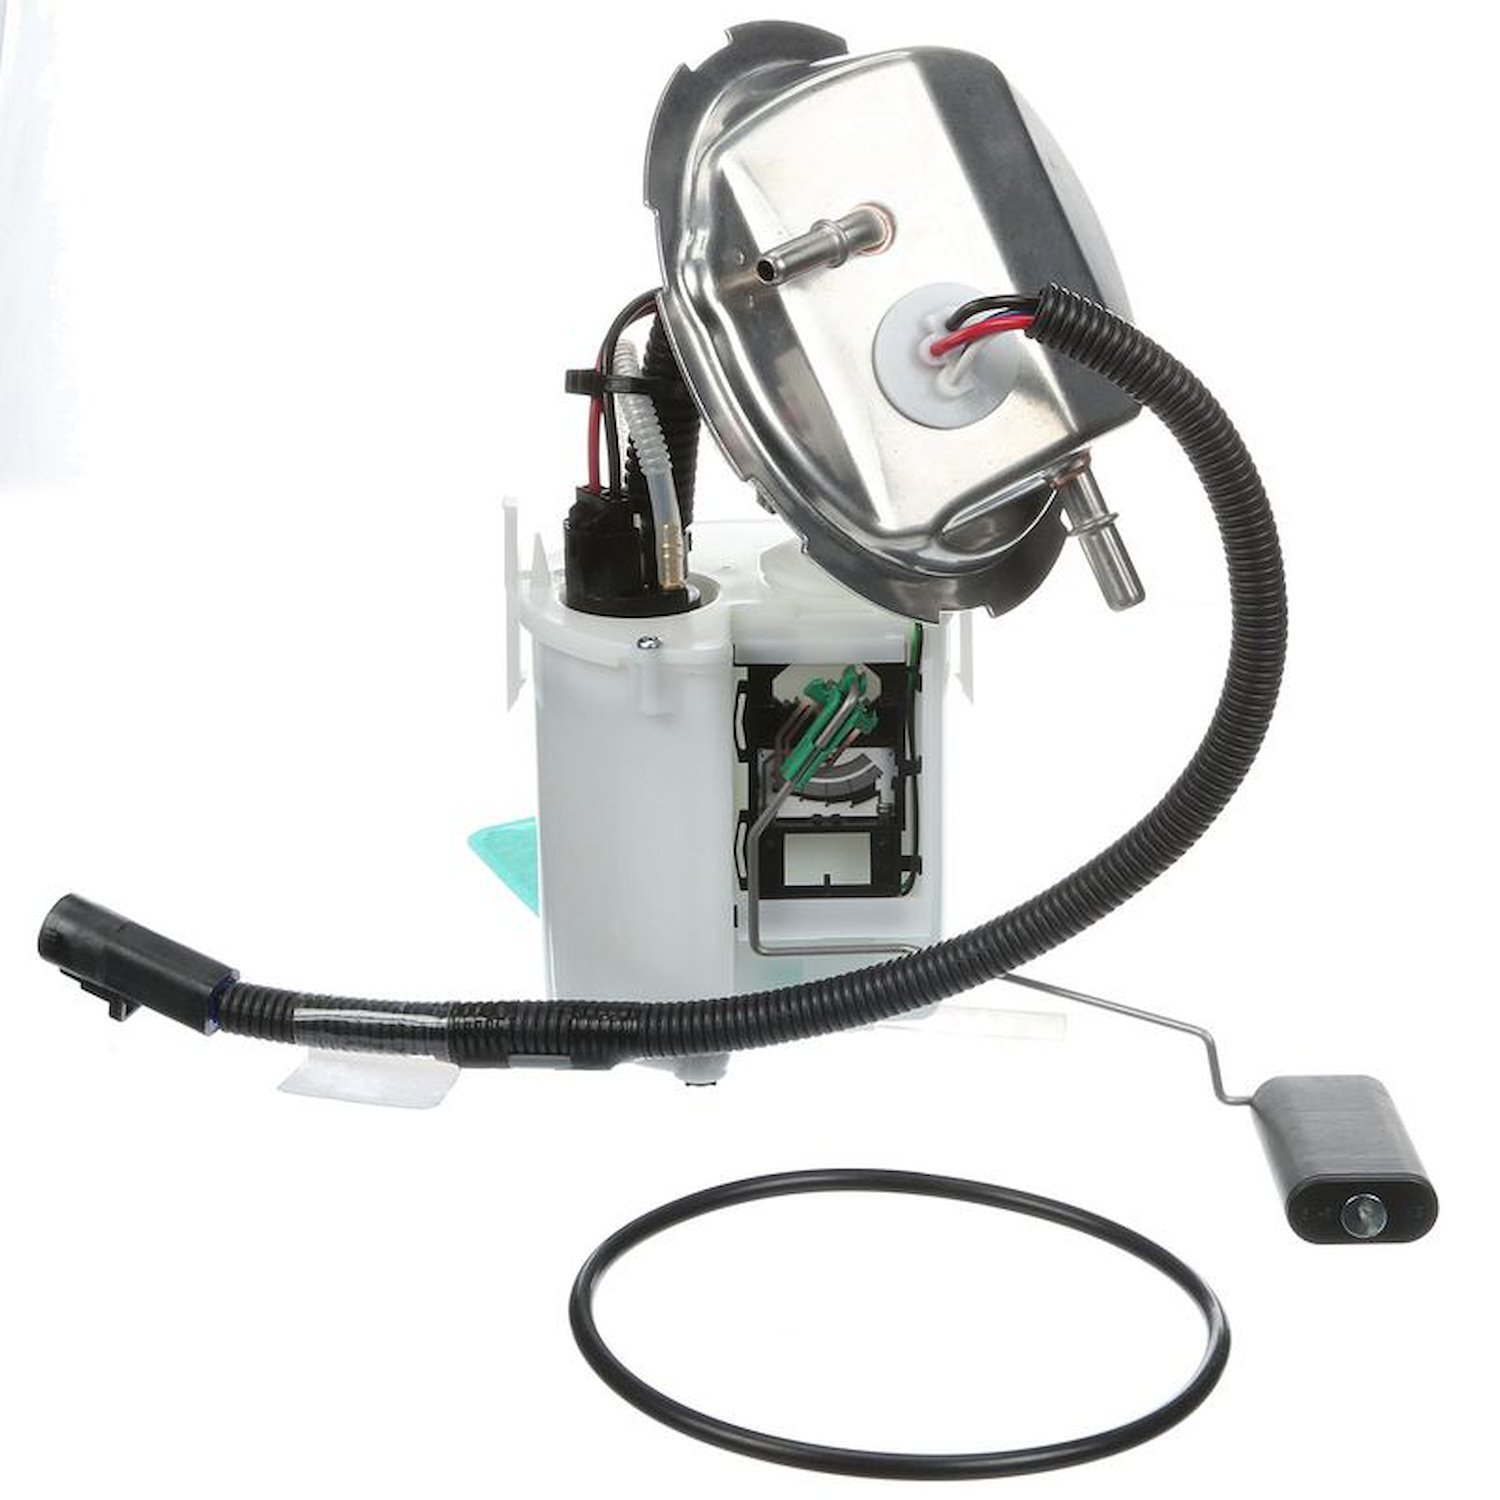 OE Ford Replacement Fuel Pump Module Assembly for 2008 Ford Focus